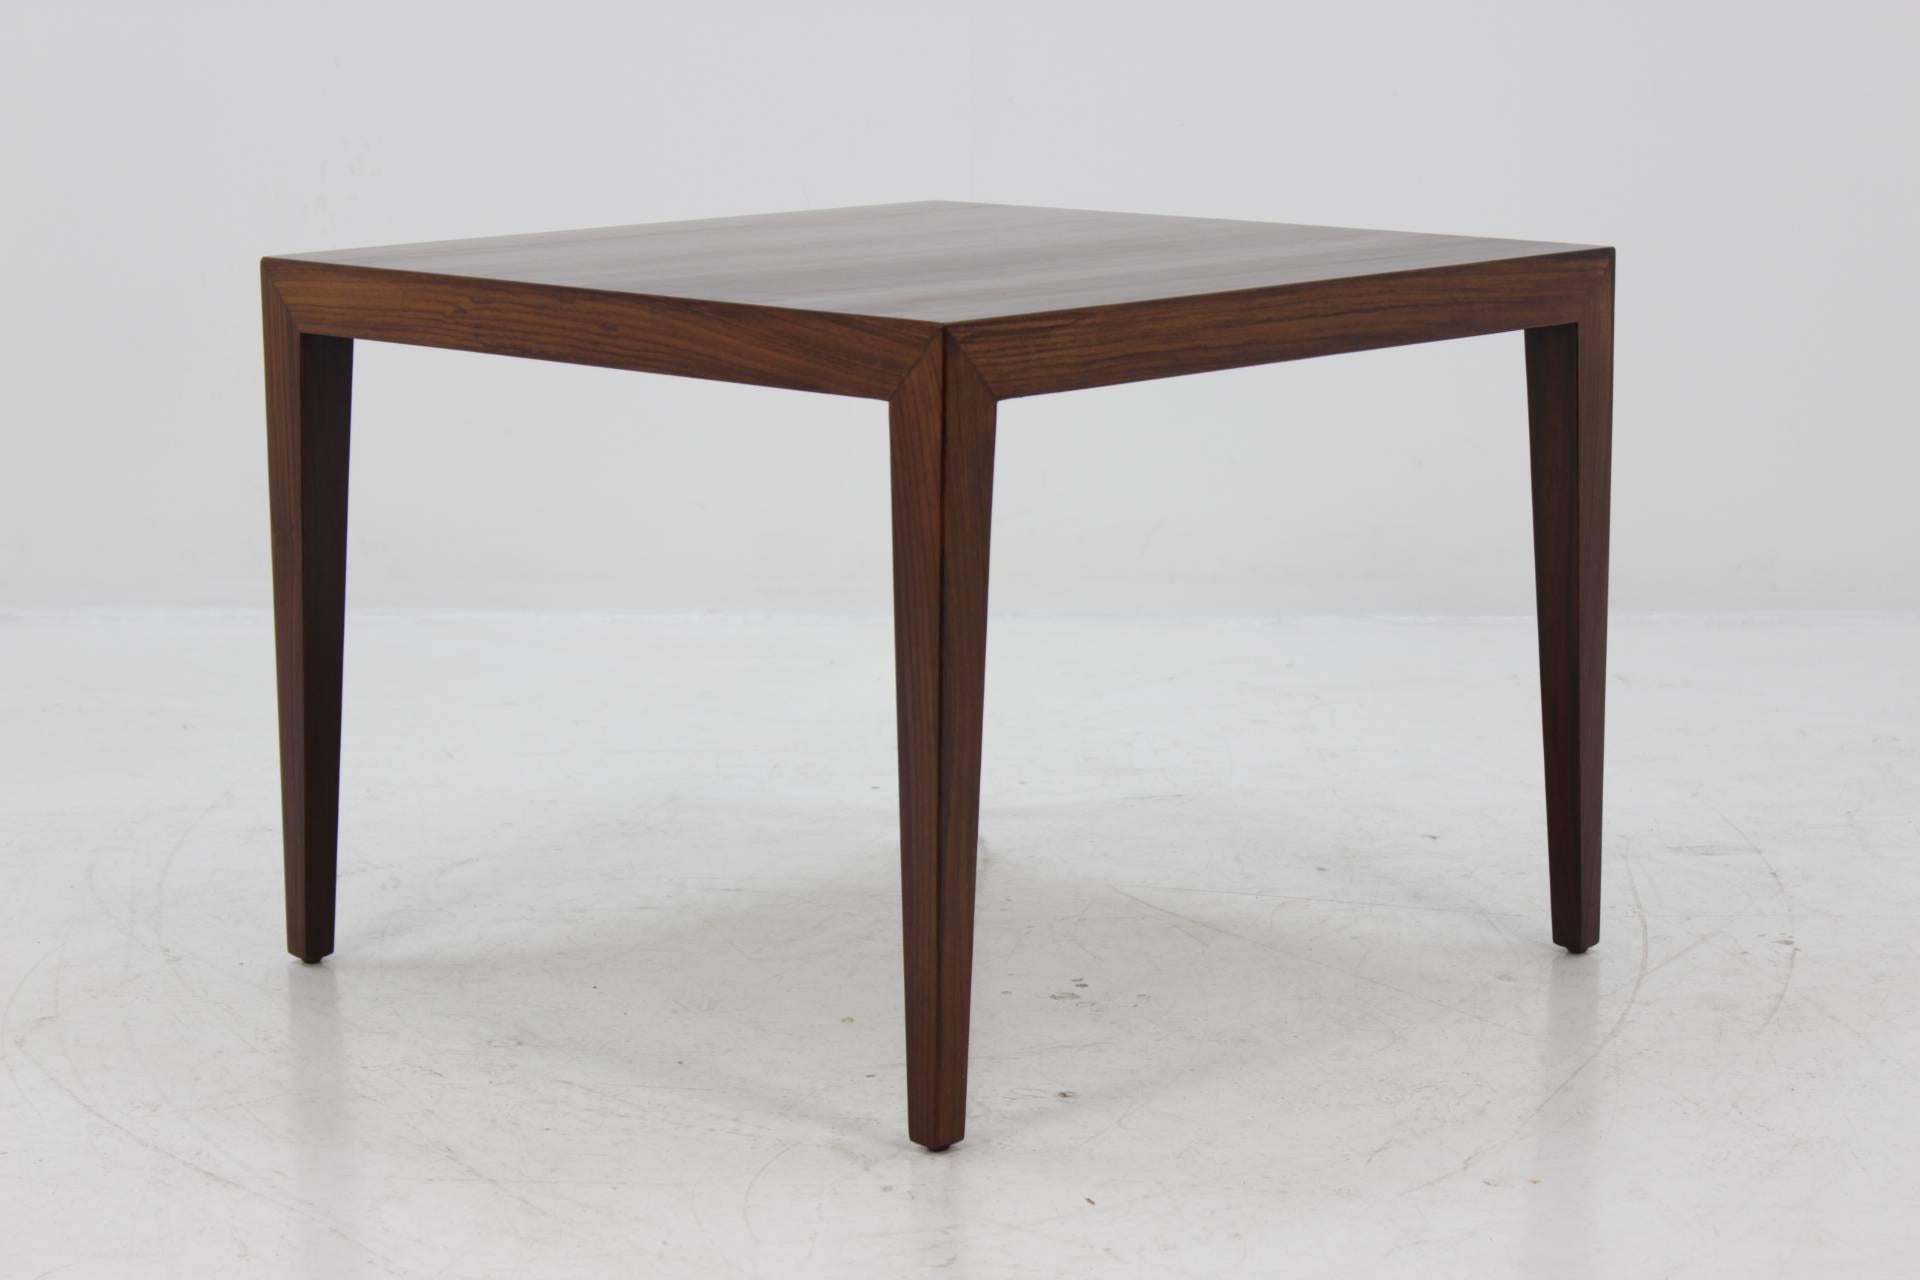 Produced in Denmark.
Made of rosewood and rosewood veneer. Carefully refurbished.